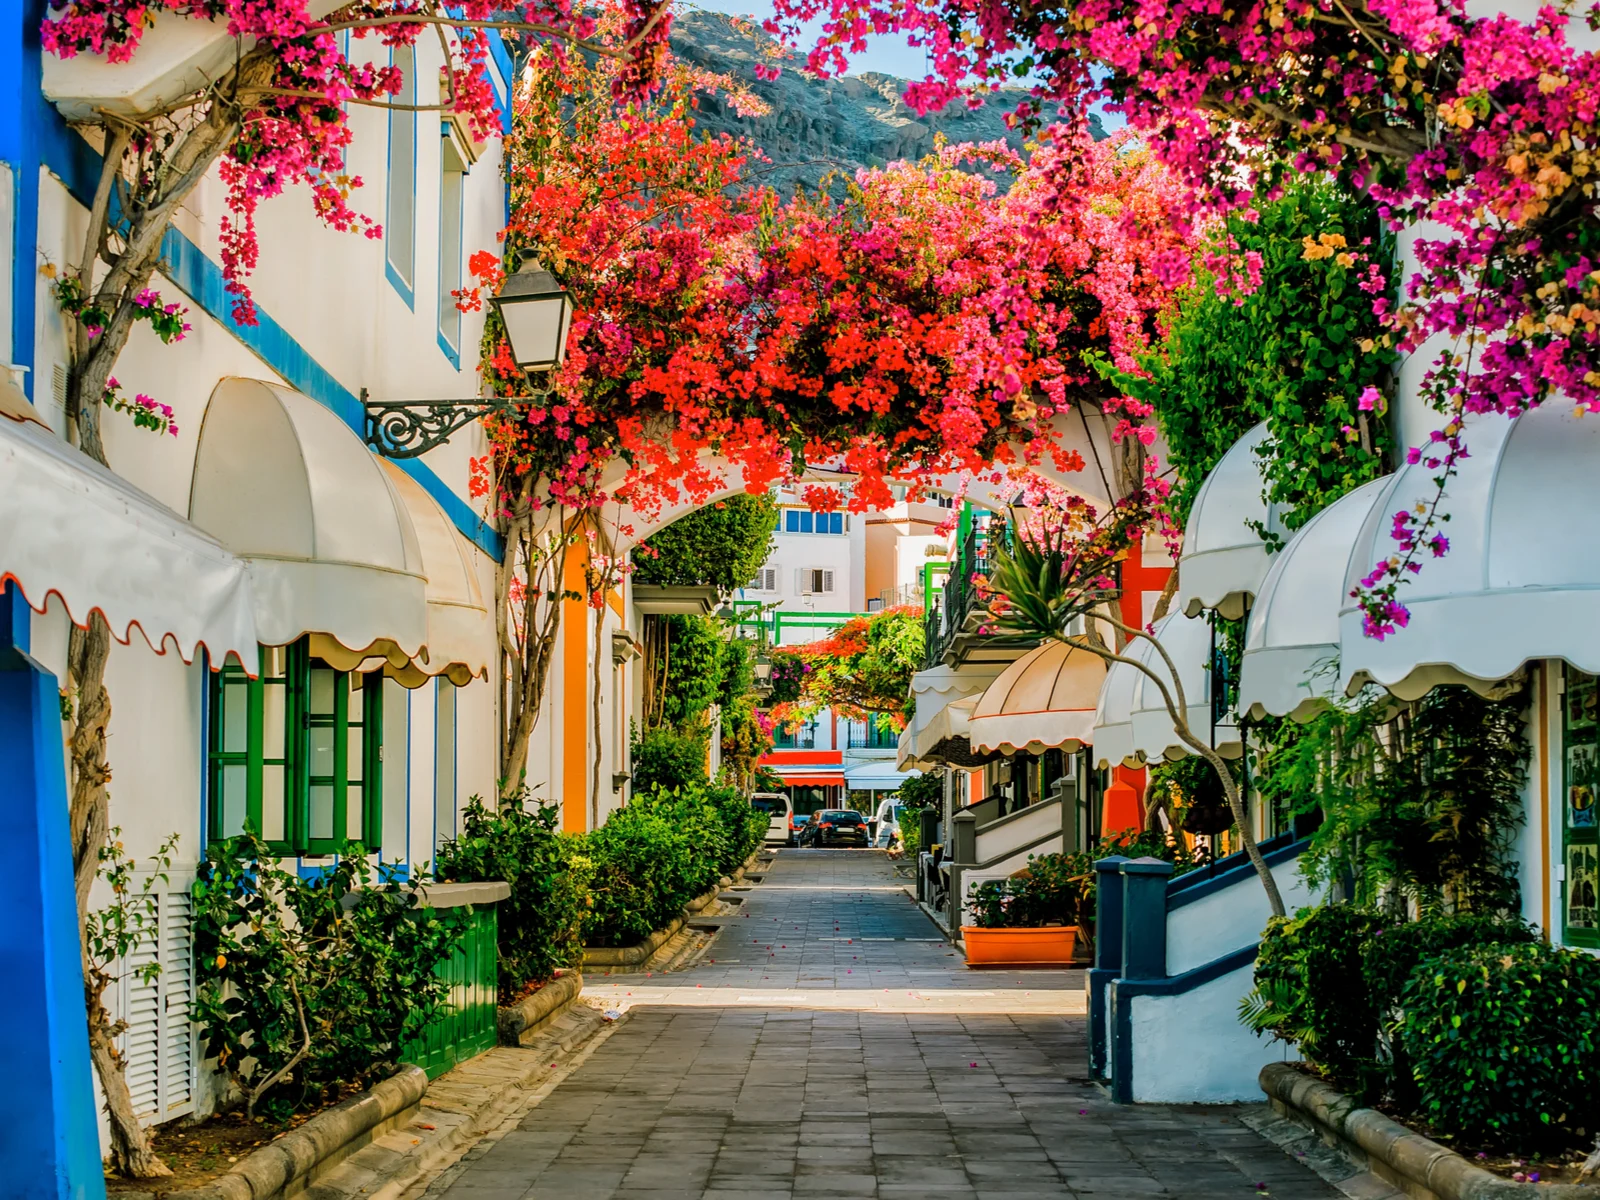 During the least busy time to visit Spain, the Puerto de Mogan town is pictured from an alleyway with brightly colored buildings and shutters